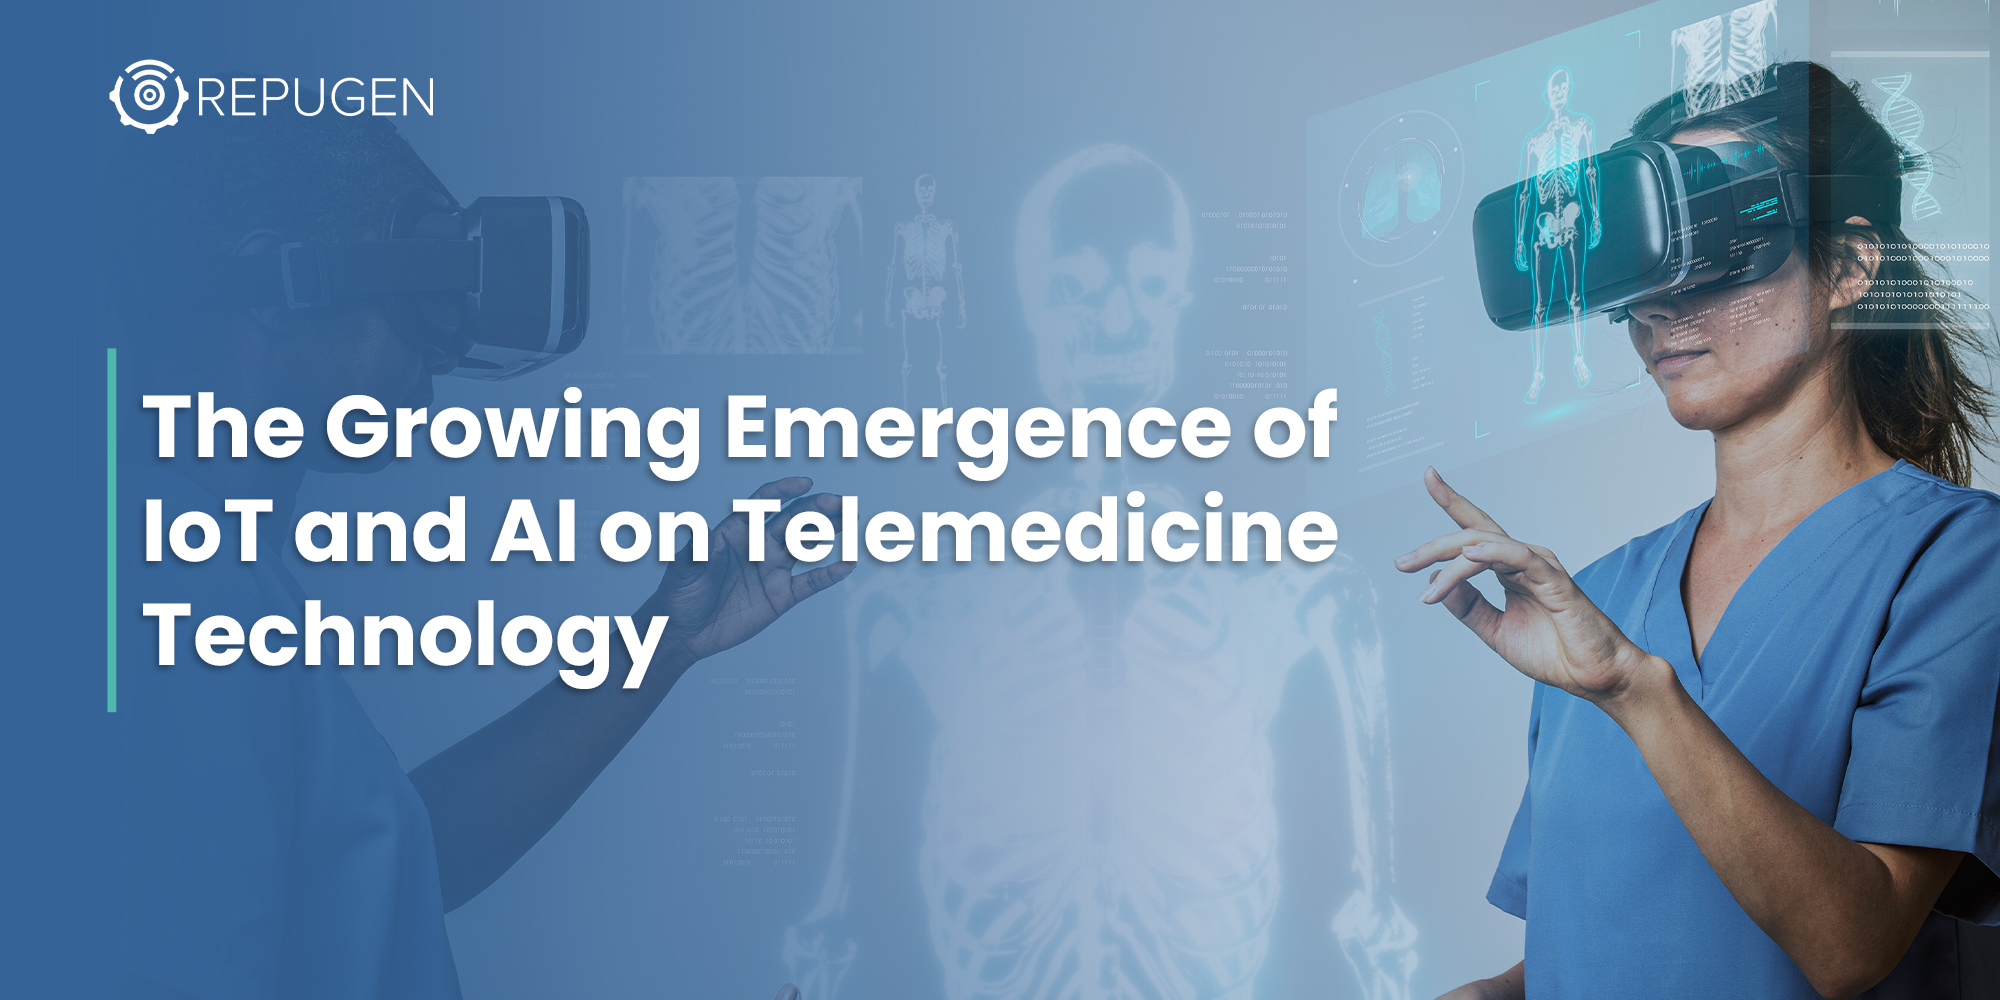 The Growing Emergence of IoT and AI in Telemedicine Technology